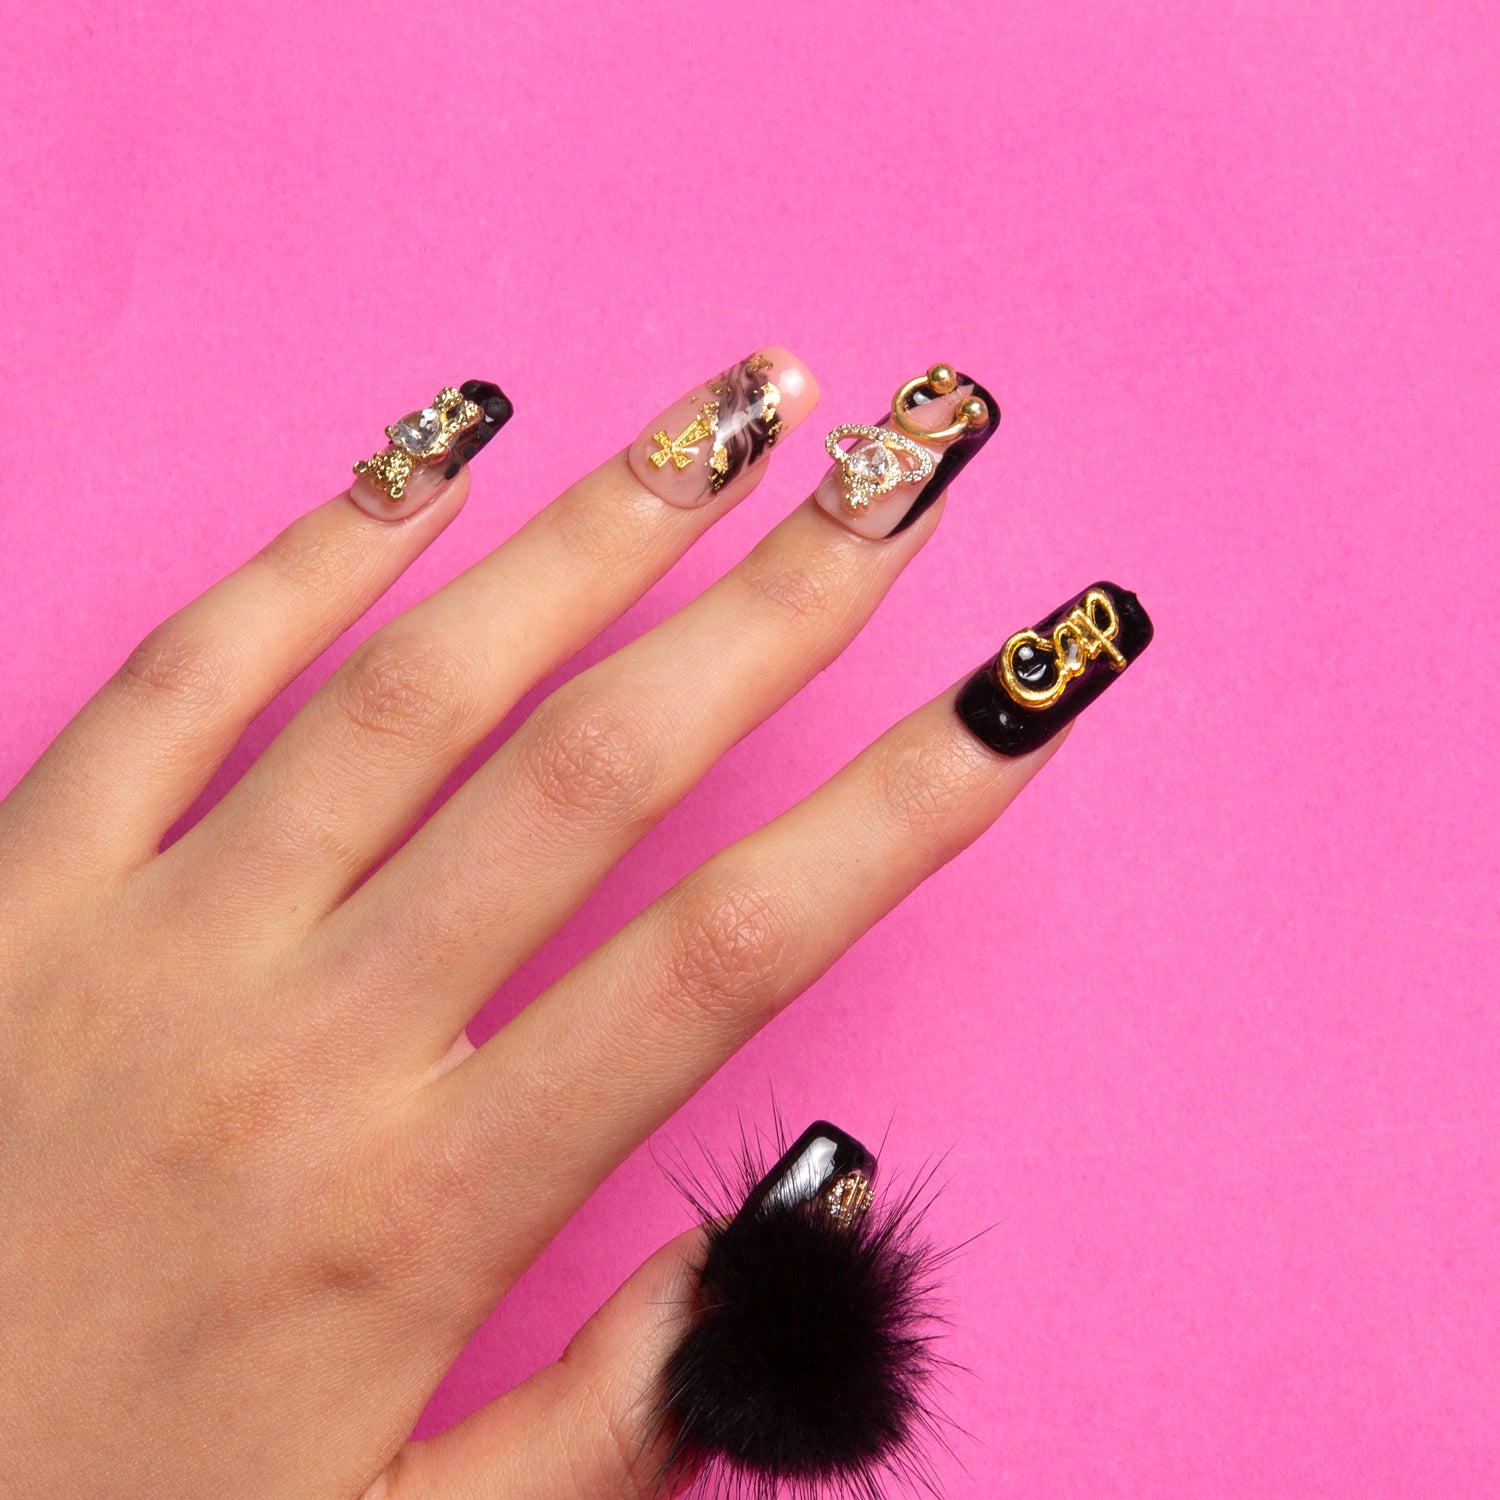 Hand with black and white Capricorn zodiac press-on nails adorned with gold decorations and detachable fluffy balls.